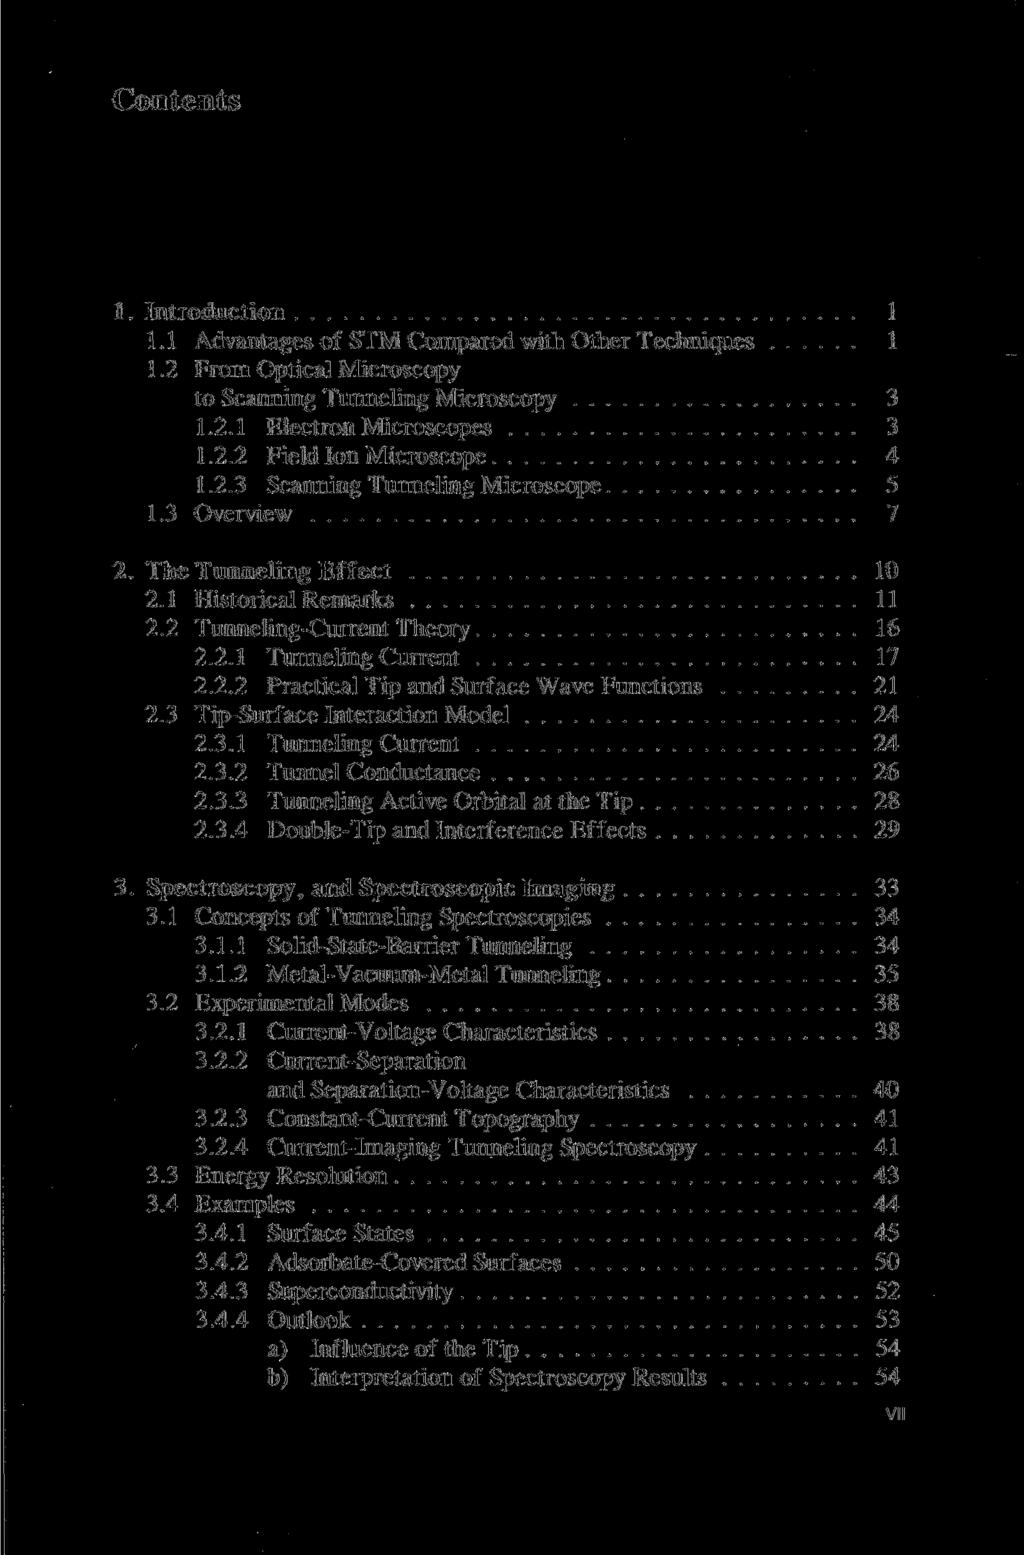 Contents 1. Introduction 1 1.1 Advantages of STM Compared with Other Techniques 1 1.2 From Optical Microscopy to Scanning Tunneling Microscopy 3 1.2.1 Electron Microscopes 3 1.2.2 Field Ion Microscope 4 1.